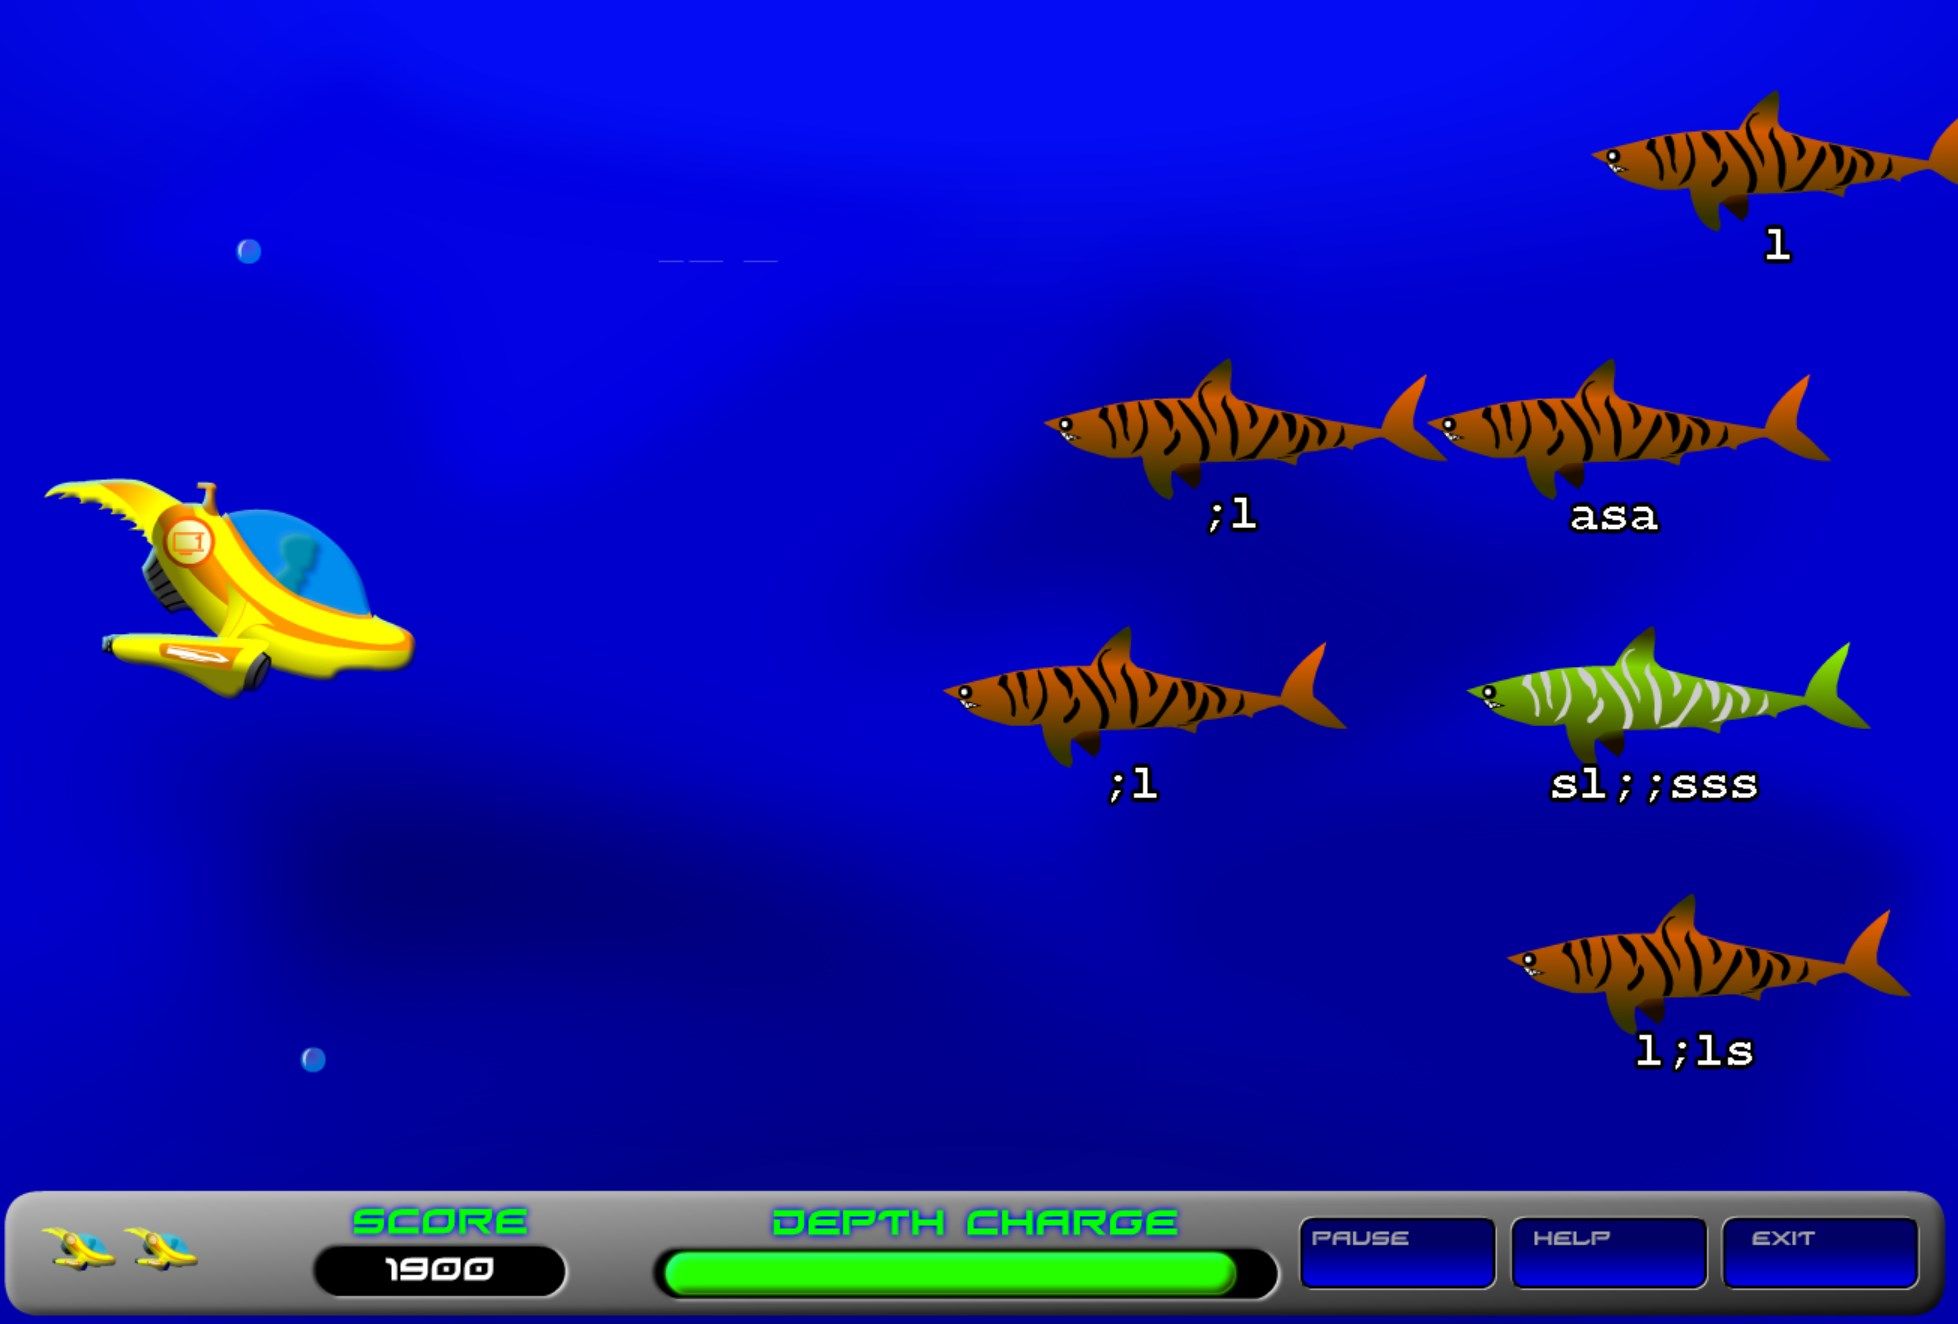 Master challenging keys and escape danger playing in the deep waters of Typing with Sharks!